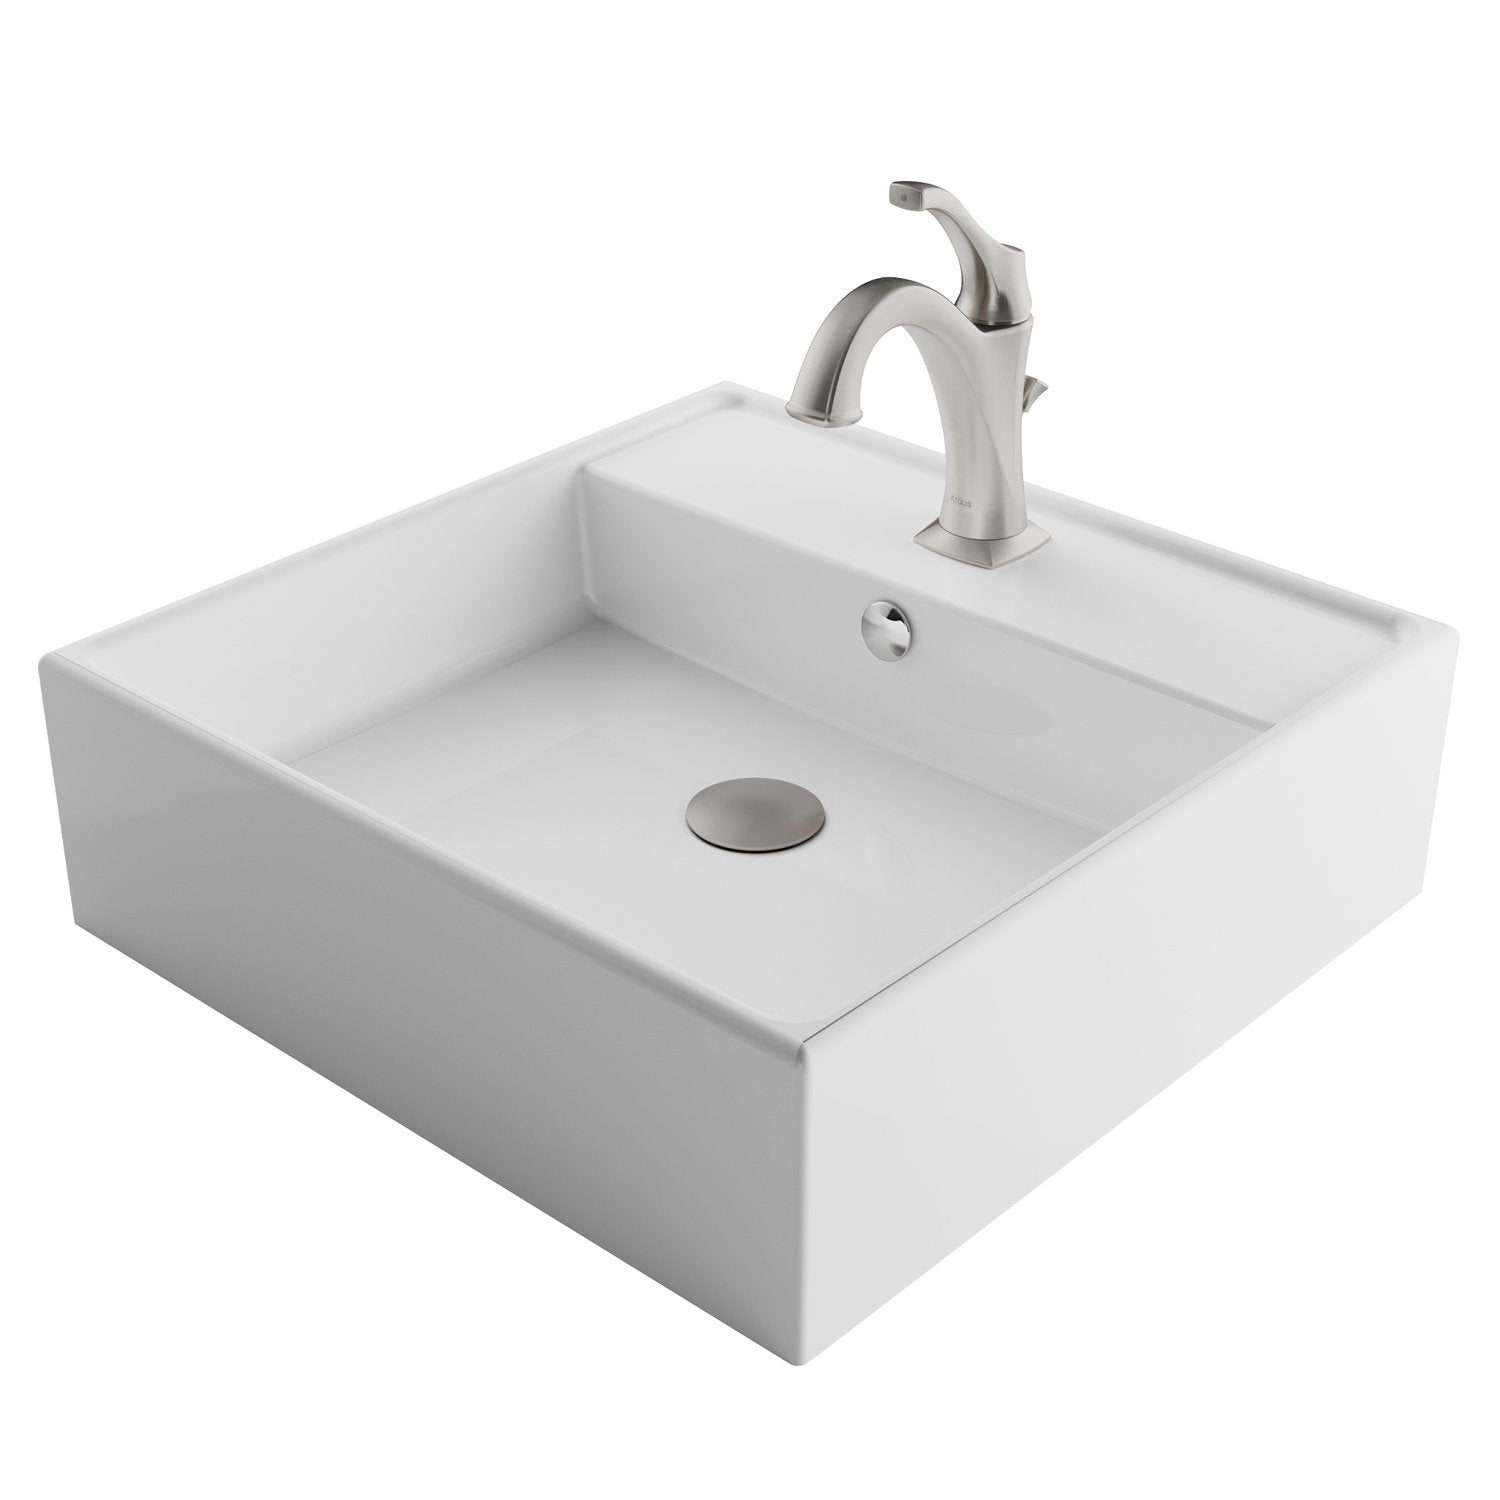 KRAUS Elavo 18 1/2-Inch Square White Porcelain Ceramic Bathroom Vessel Sink with Overflow and Arlo Faucet Combo Set with Lift Rod Drain-Bathroom Sinks & Faucet Combos-DirectSinks